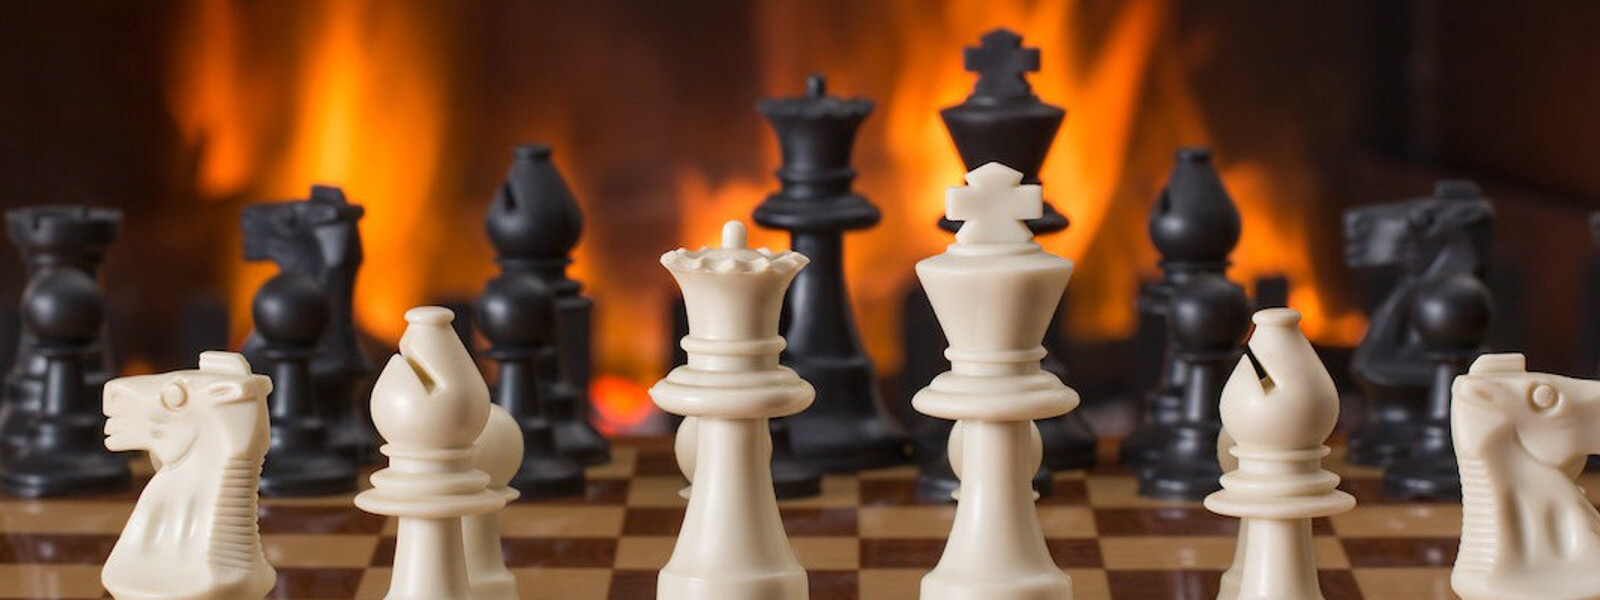 Close up of a chessboard. A fire is burning in the blurry background.